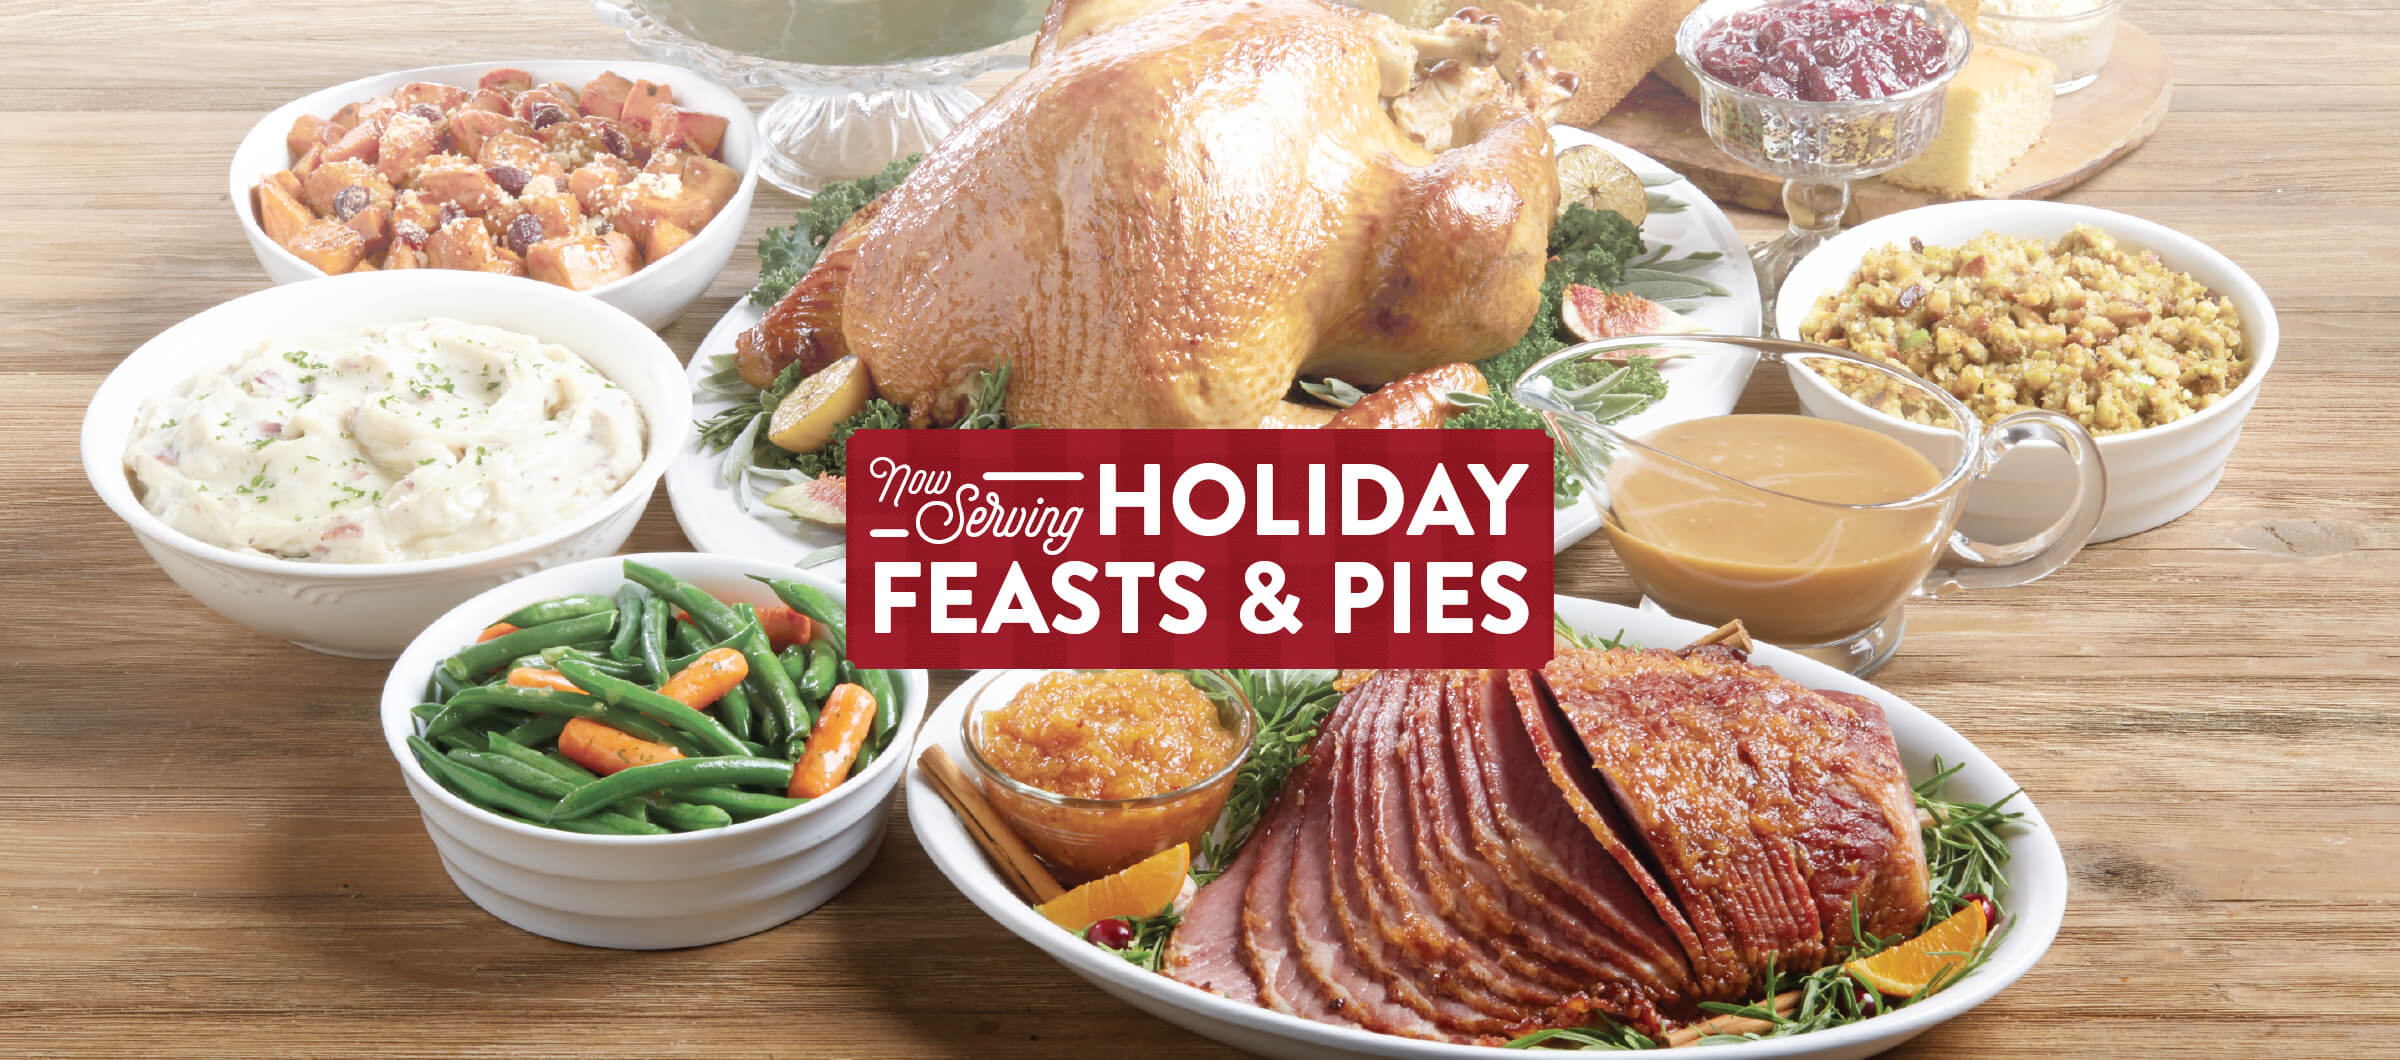 Now Serving Holiday Feasts & Pies